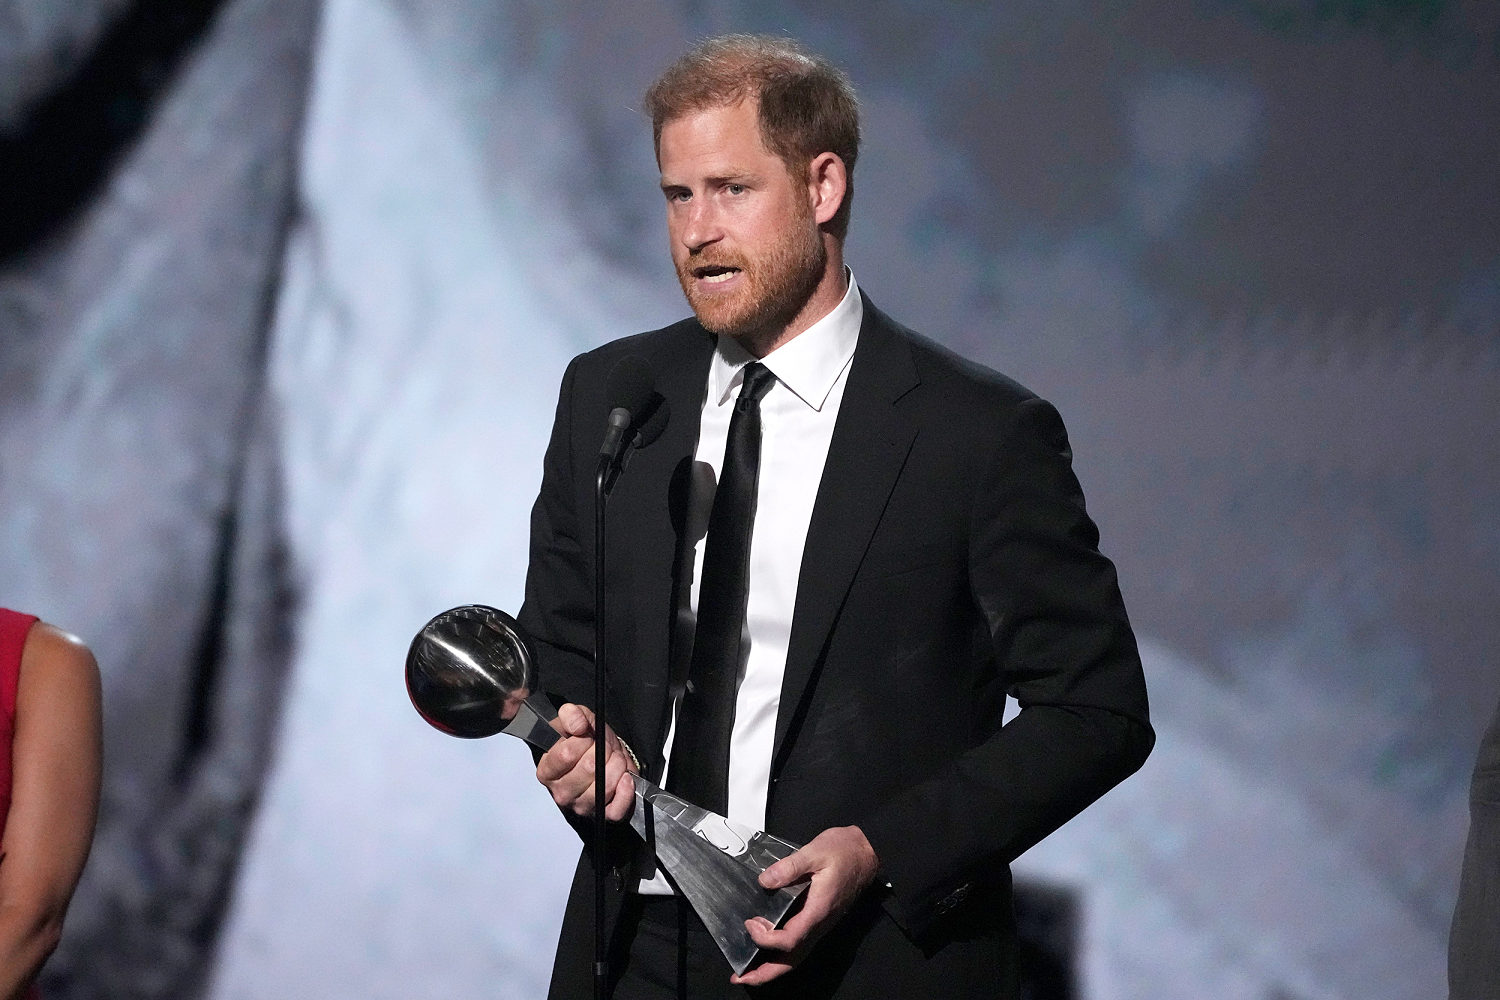 Prince Harry accepts Pat Tillman Award for Service at the ESPYs